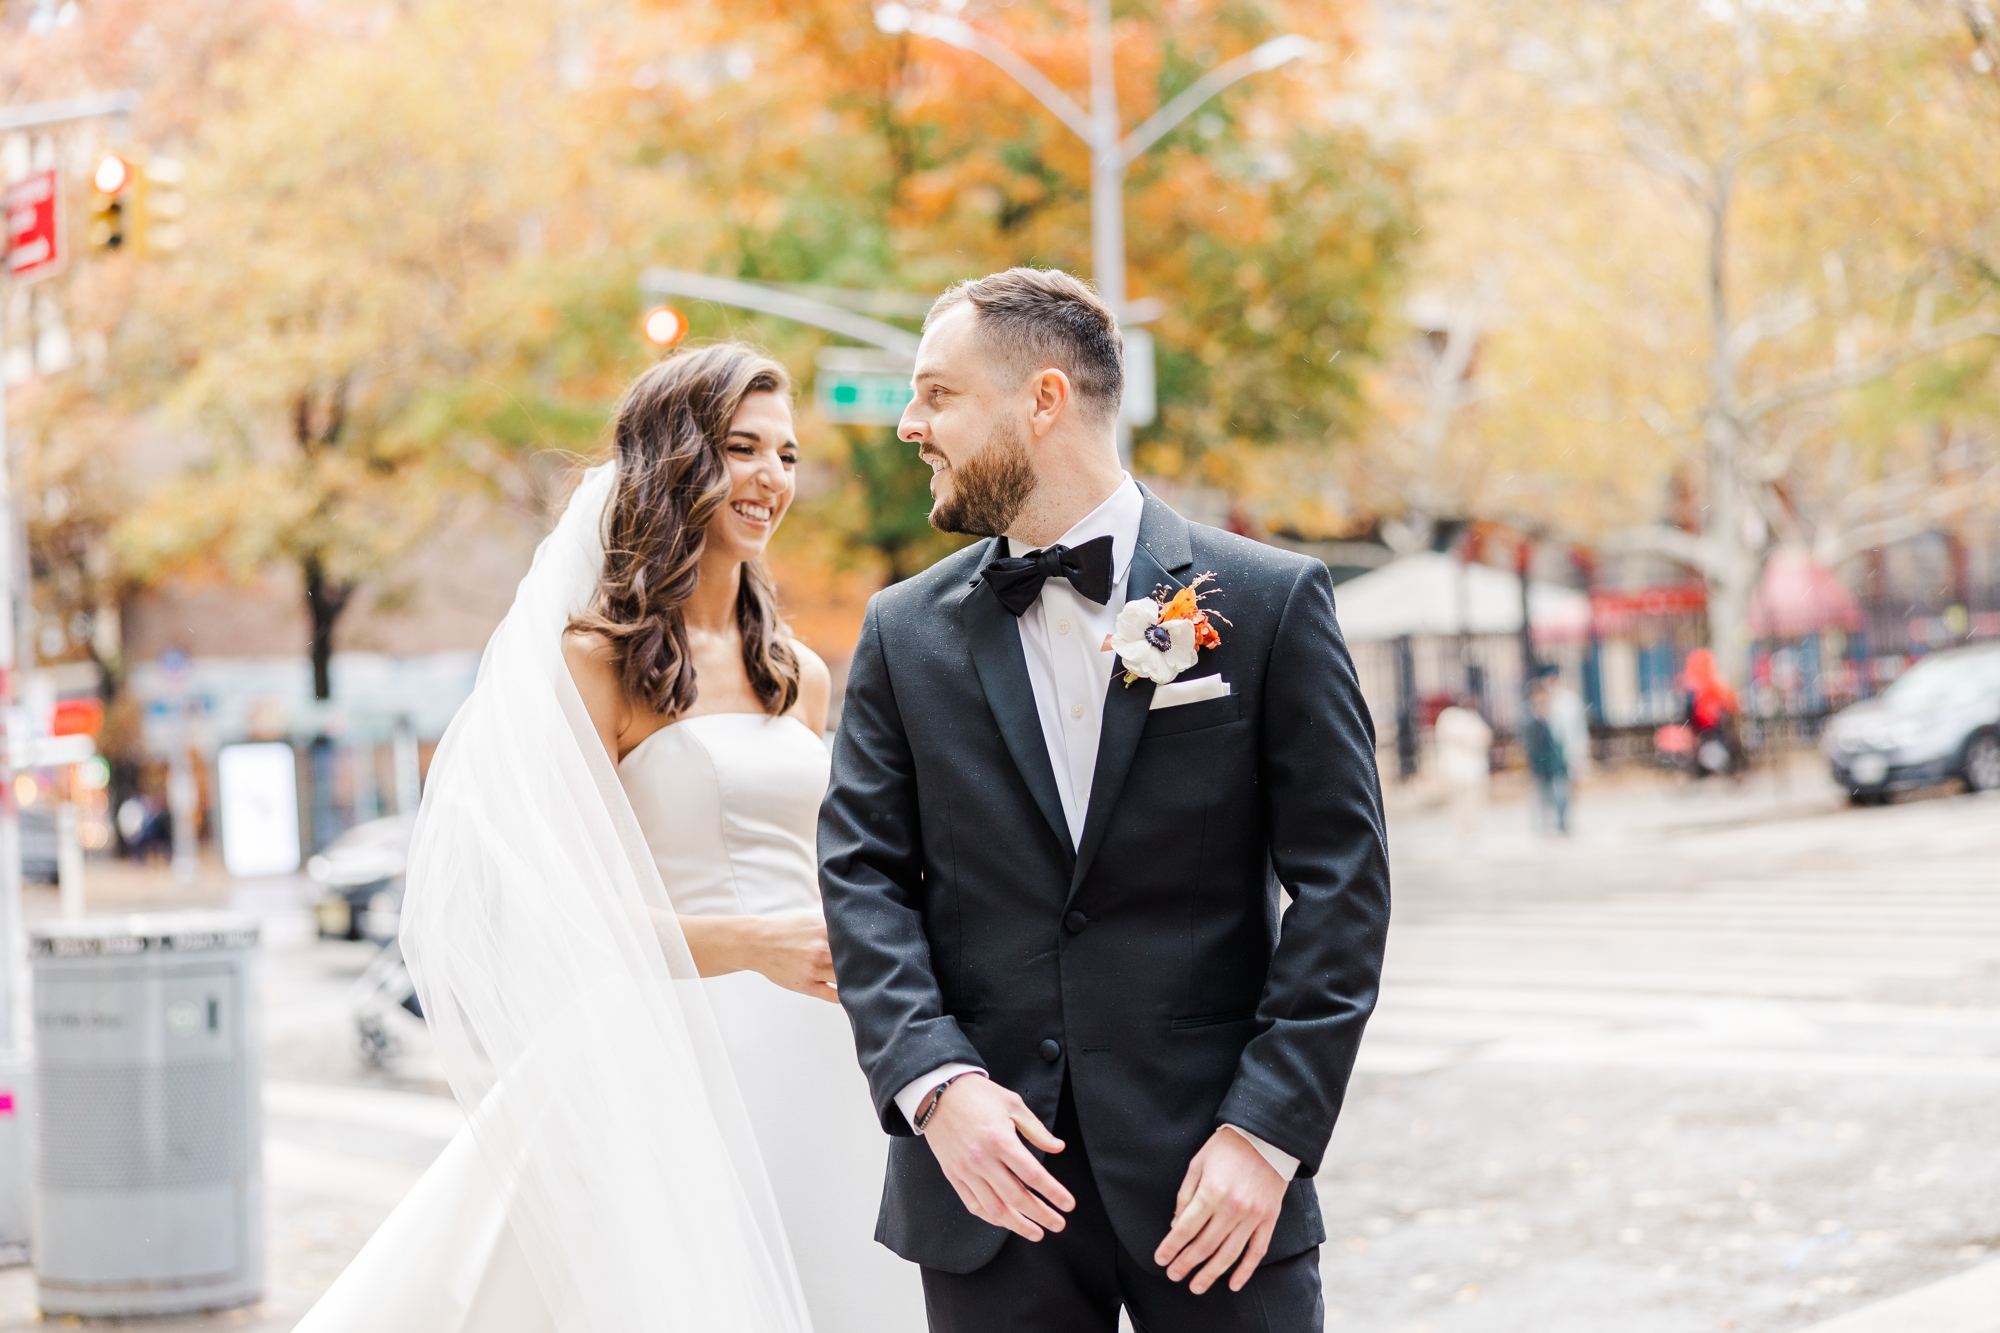 Jaw-dropping Rainy Fall Milling Room Wedding Photos in New York